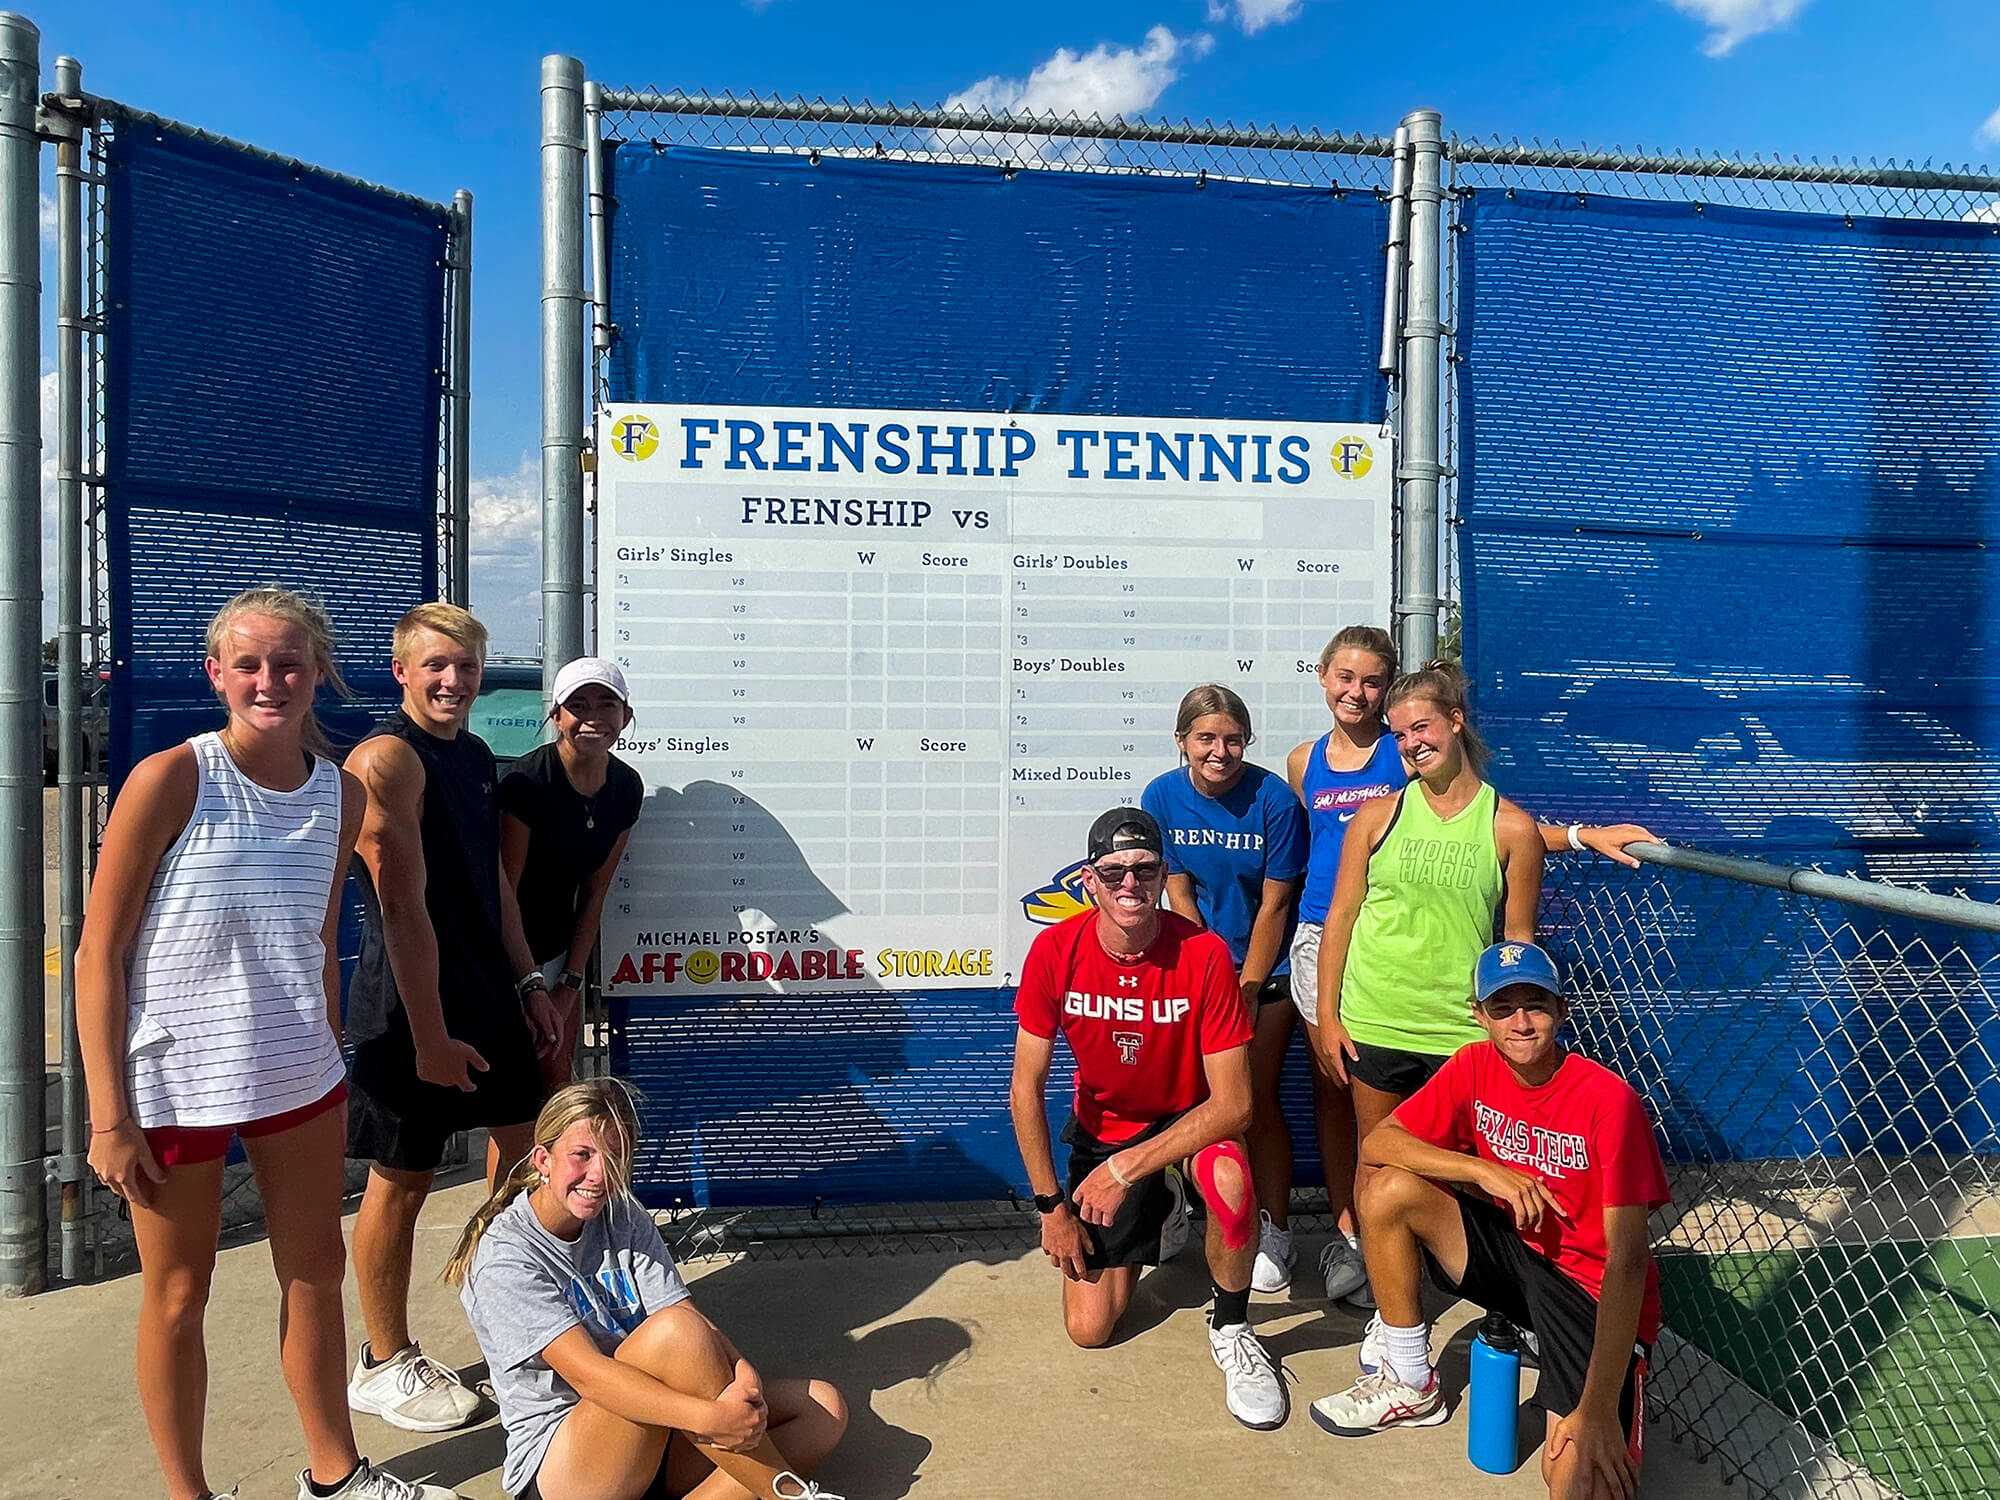 frenship tennis feature, Affordable Storage